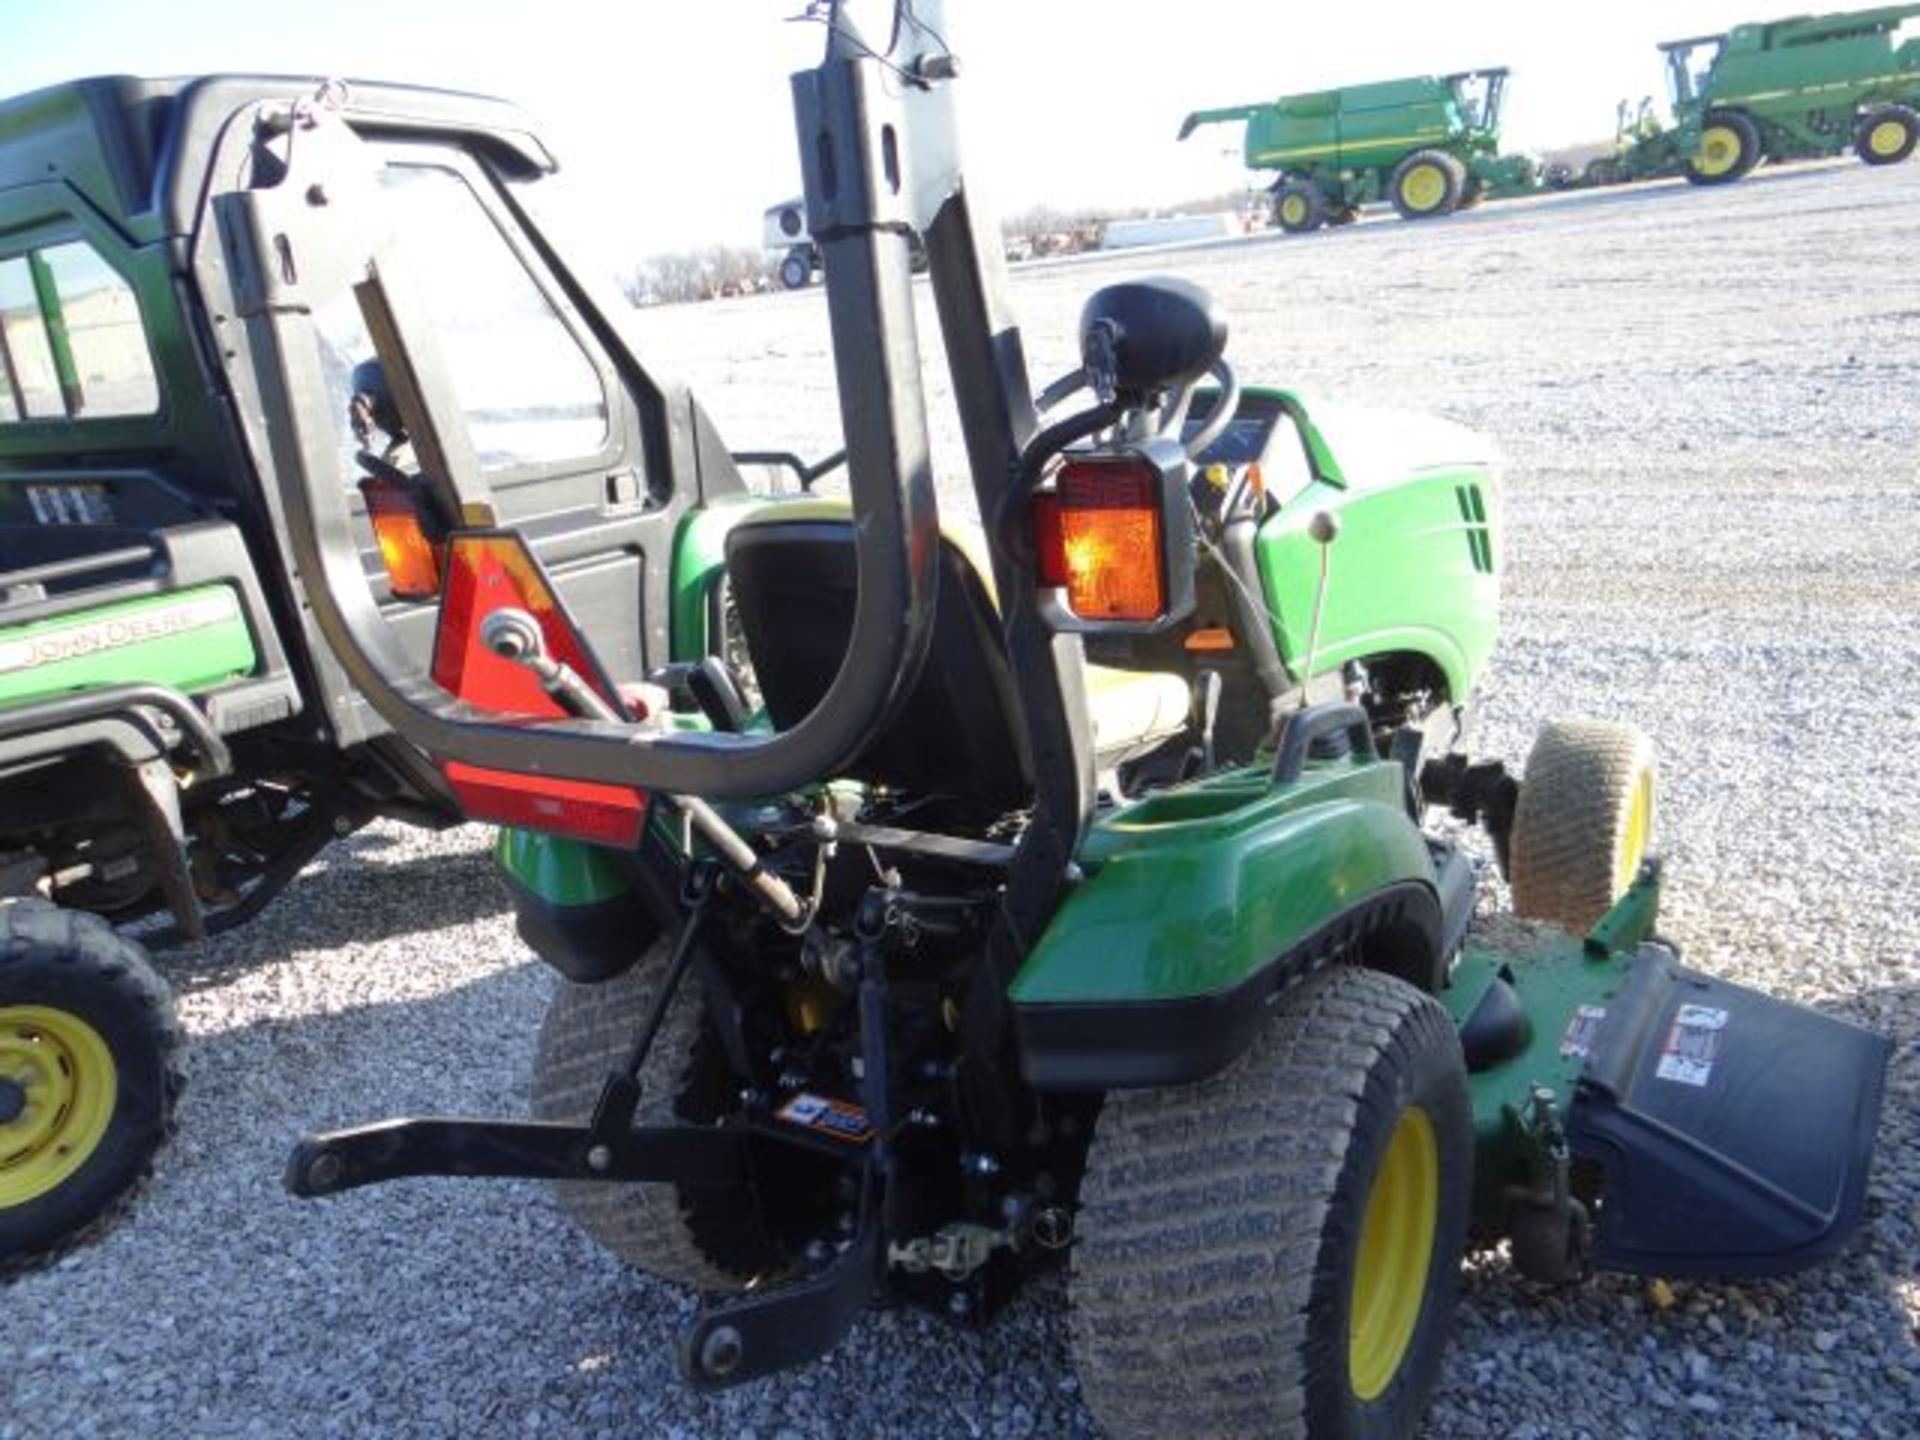 JD 1023E Compact Tractor, 2011 #112140, 405 hrs, Turf Tires, Foldable ROPS, 60D Deck - Bild 3 aus 4